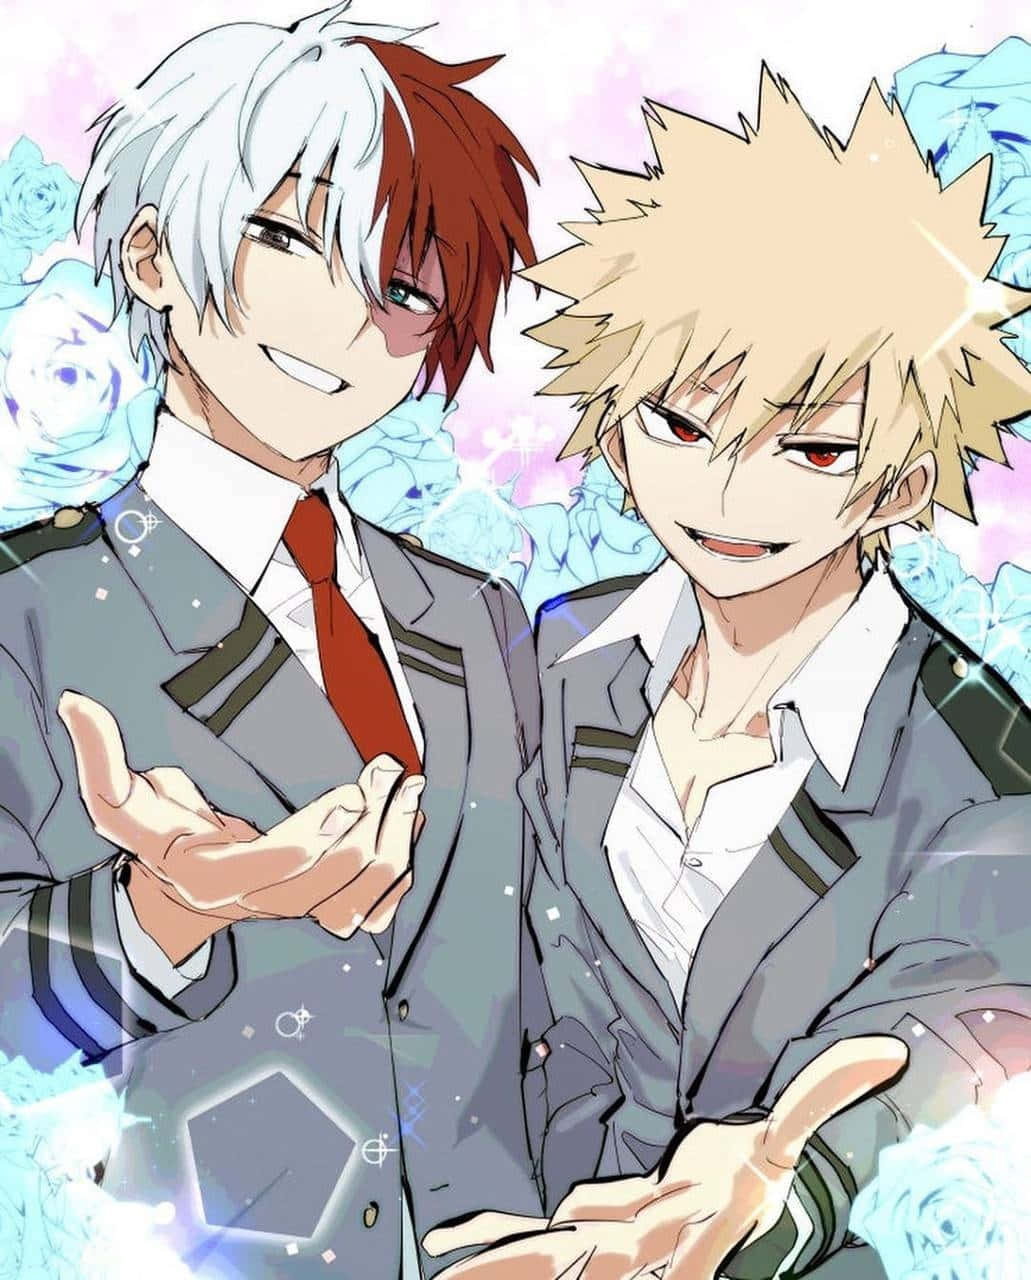 Two Anime Boys In School Uniforms With Flowers Wallpaper